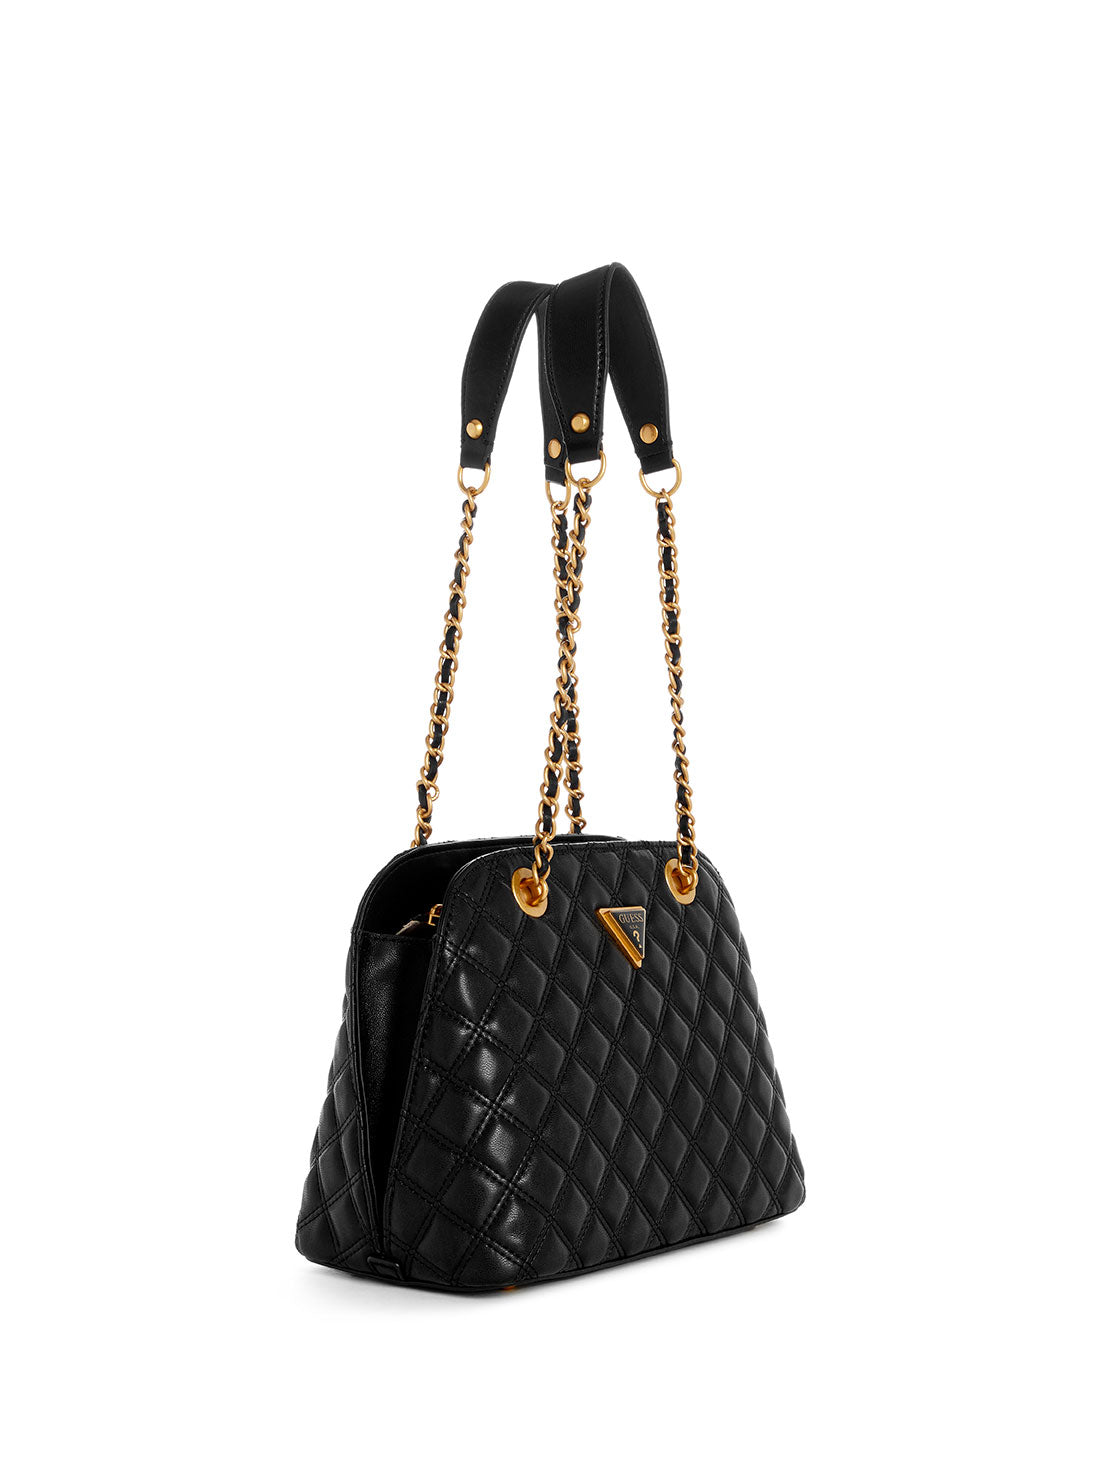 GUESS Black Giully Dome Satchel Bag side view